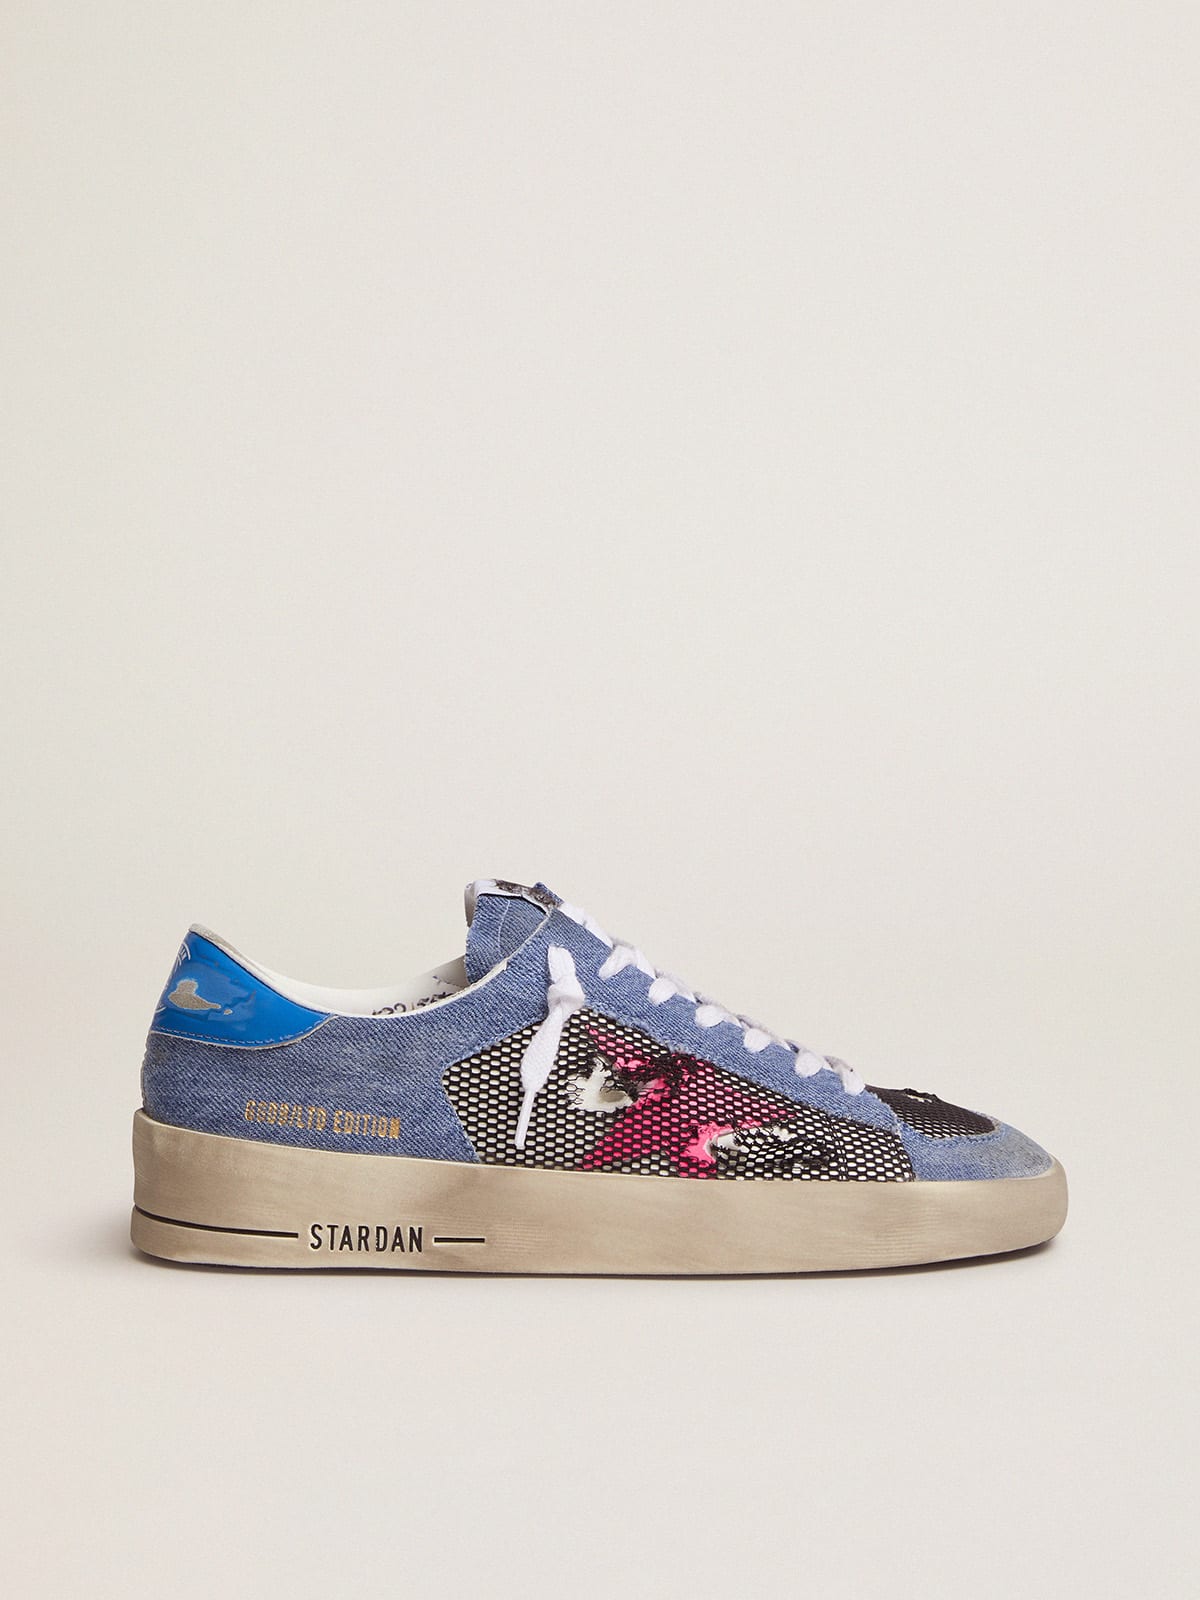 Limited Edition LAB denim Stardan sneakers with fuchsia star | Goose